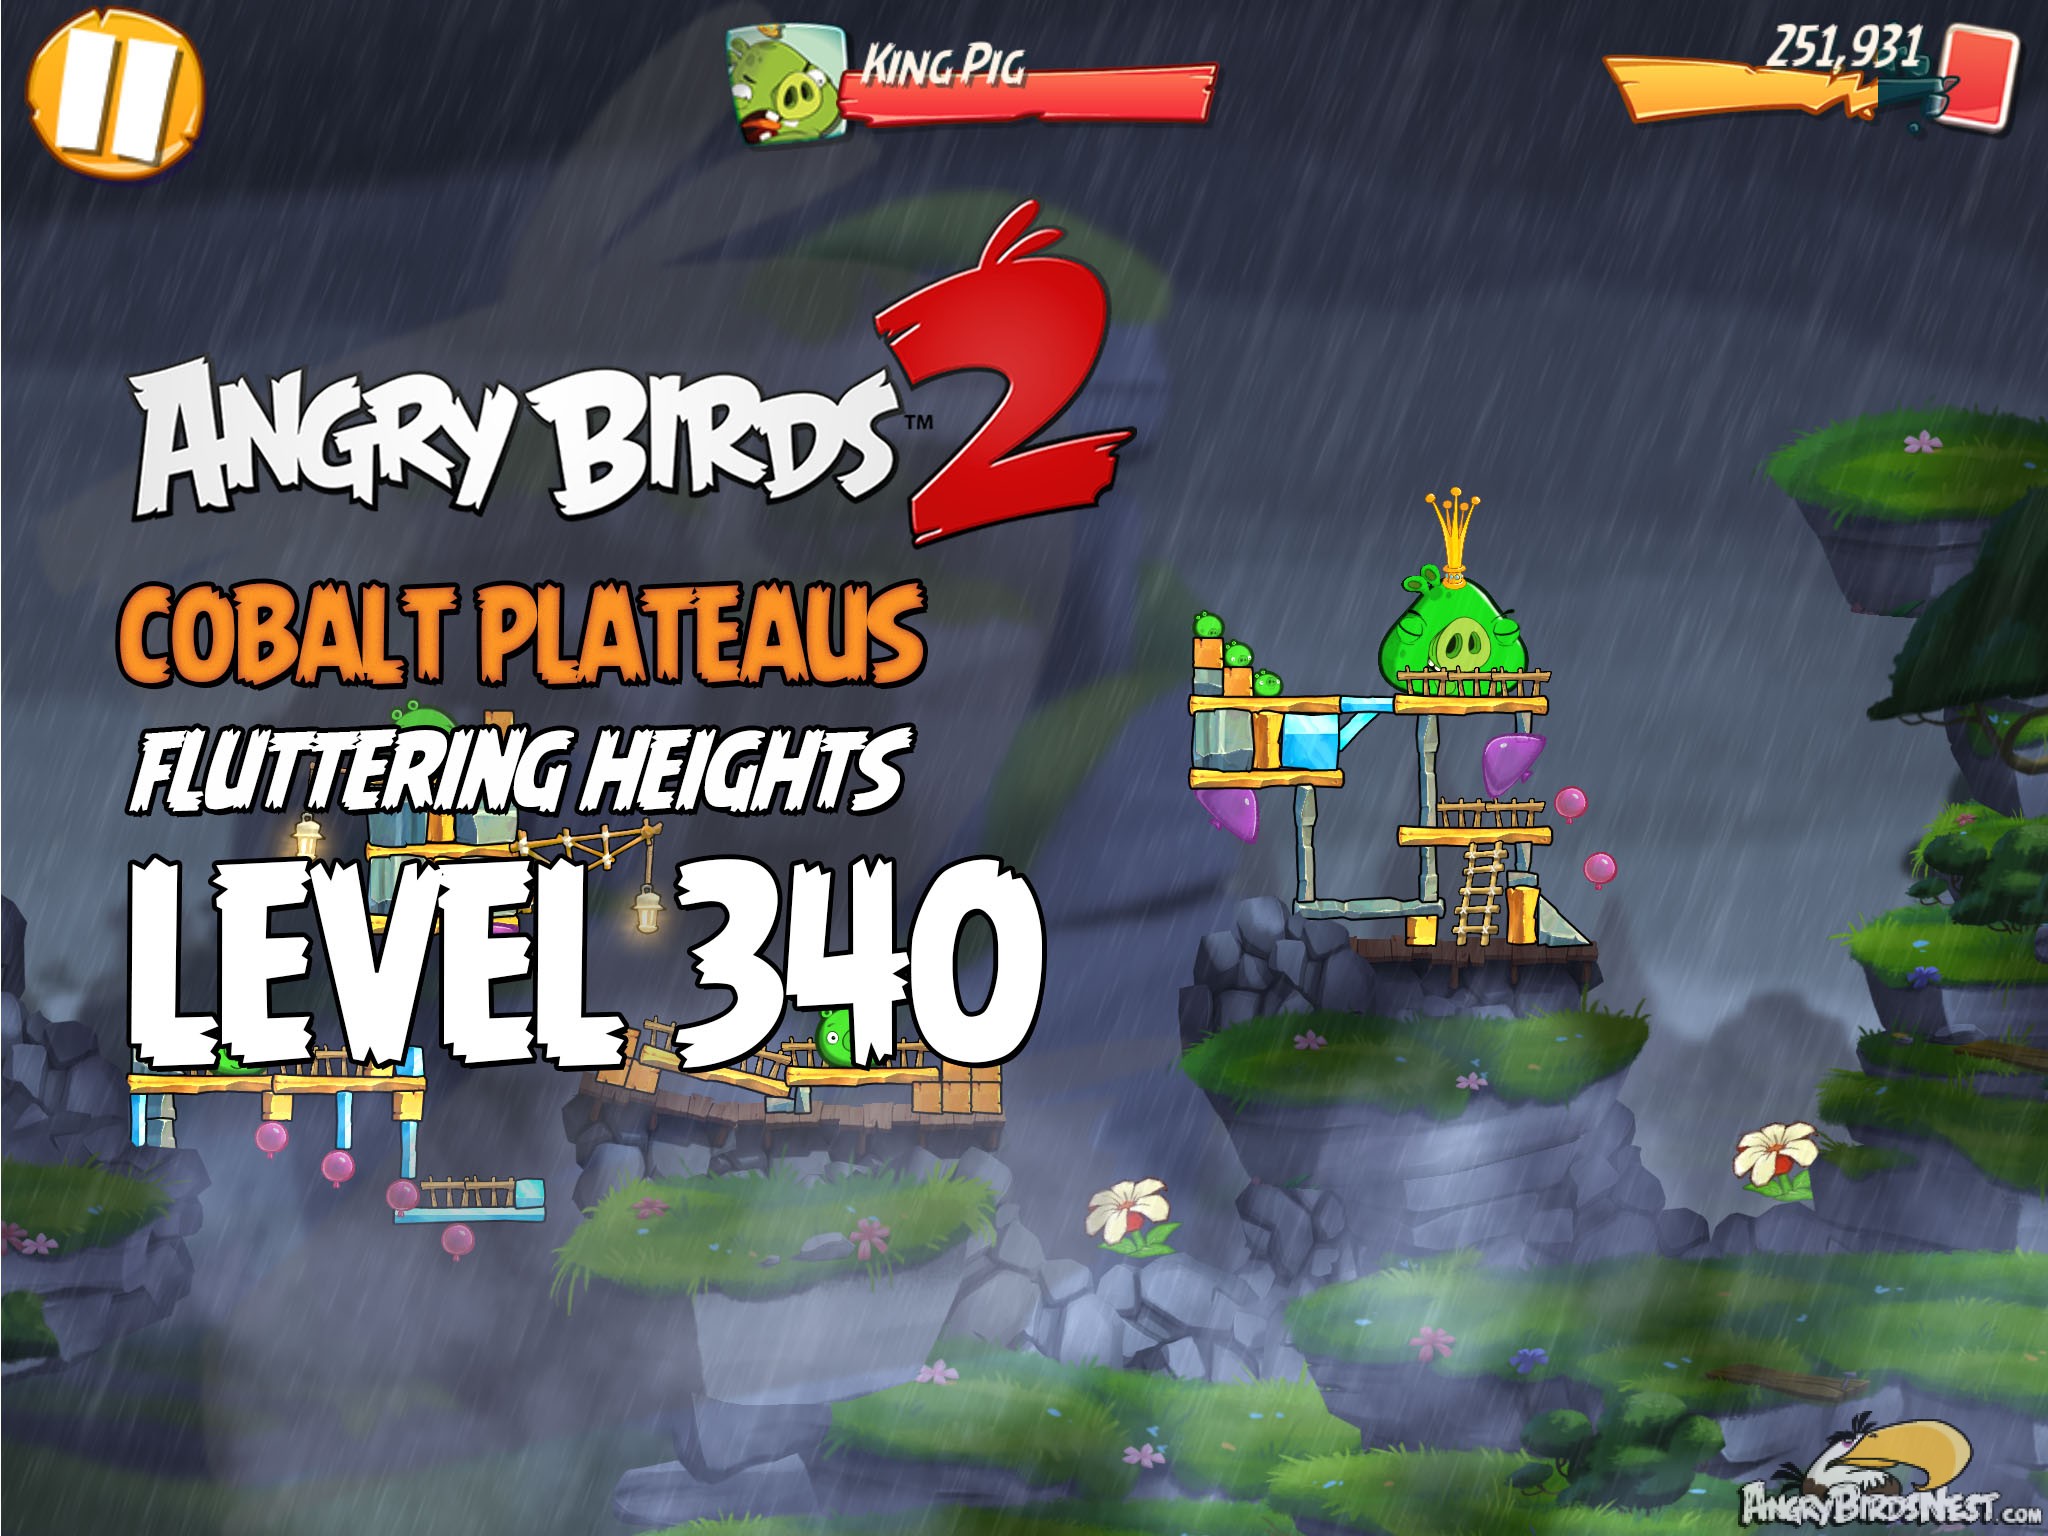 Angry Birds 2 Level 340 Cobalt Plateaus Fluttering Heights Image